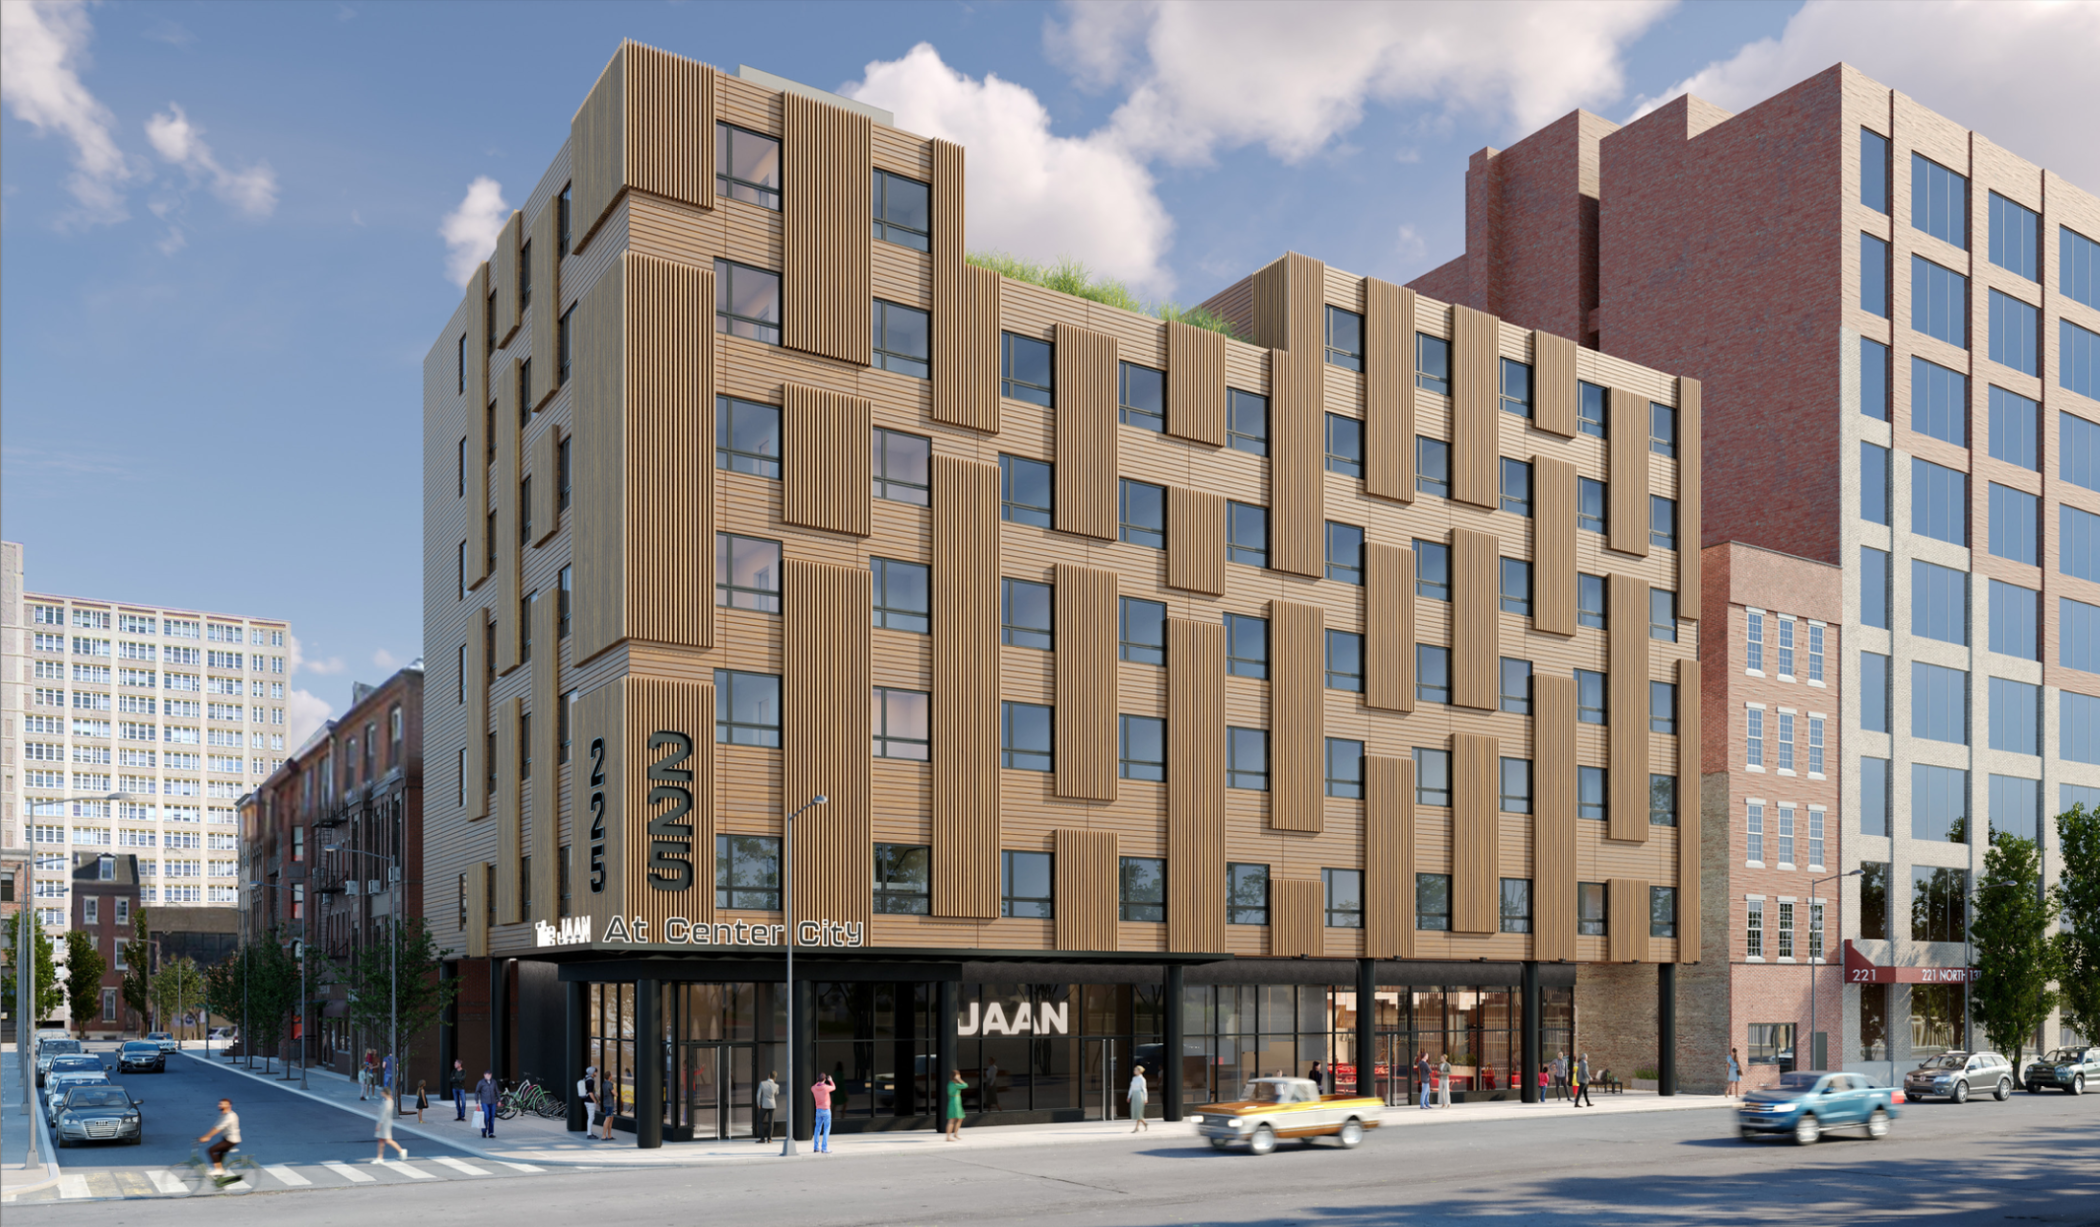 Austin-based Locale Hospitality is building its first apartment-hotel project in Philadelphia. The 81-unit property will feature studio, one- and two-bedroom apartments that function as a hotel. (Locale Hospitality)